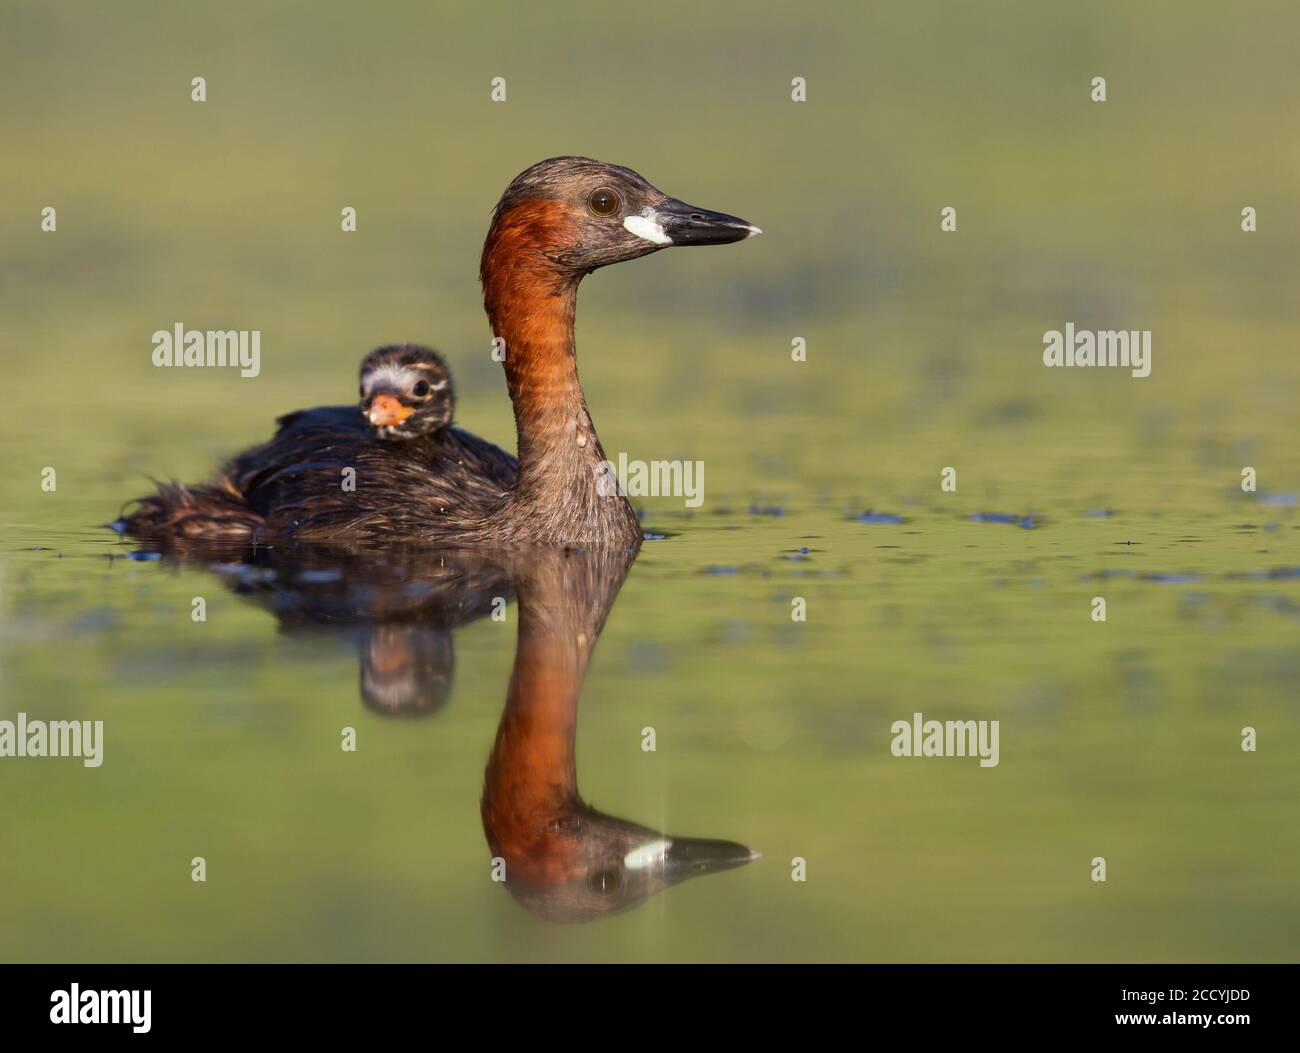 Adult Little Grebe (Tachybaptus ruficollis ruficollis) swimming on a lake in Germany together with a small chick. Stock Photo